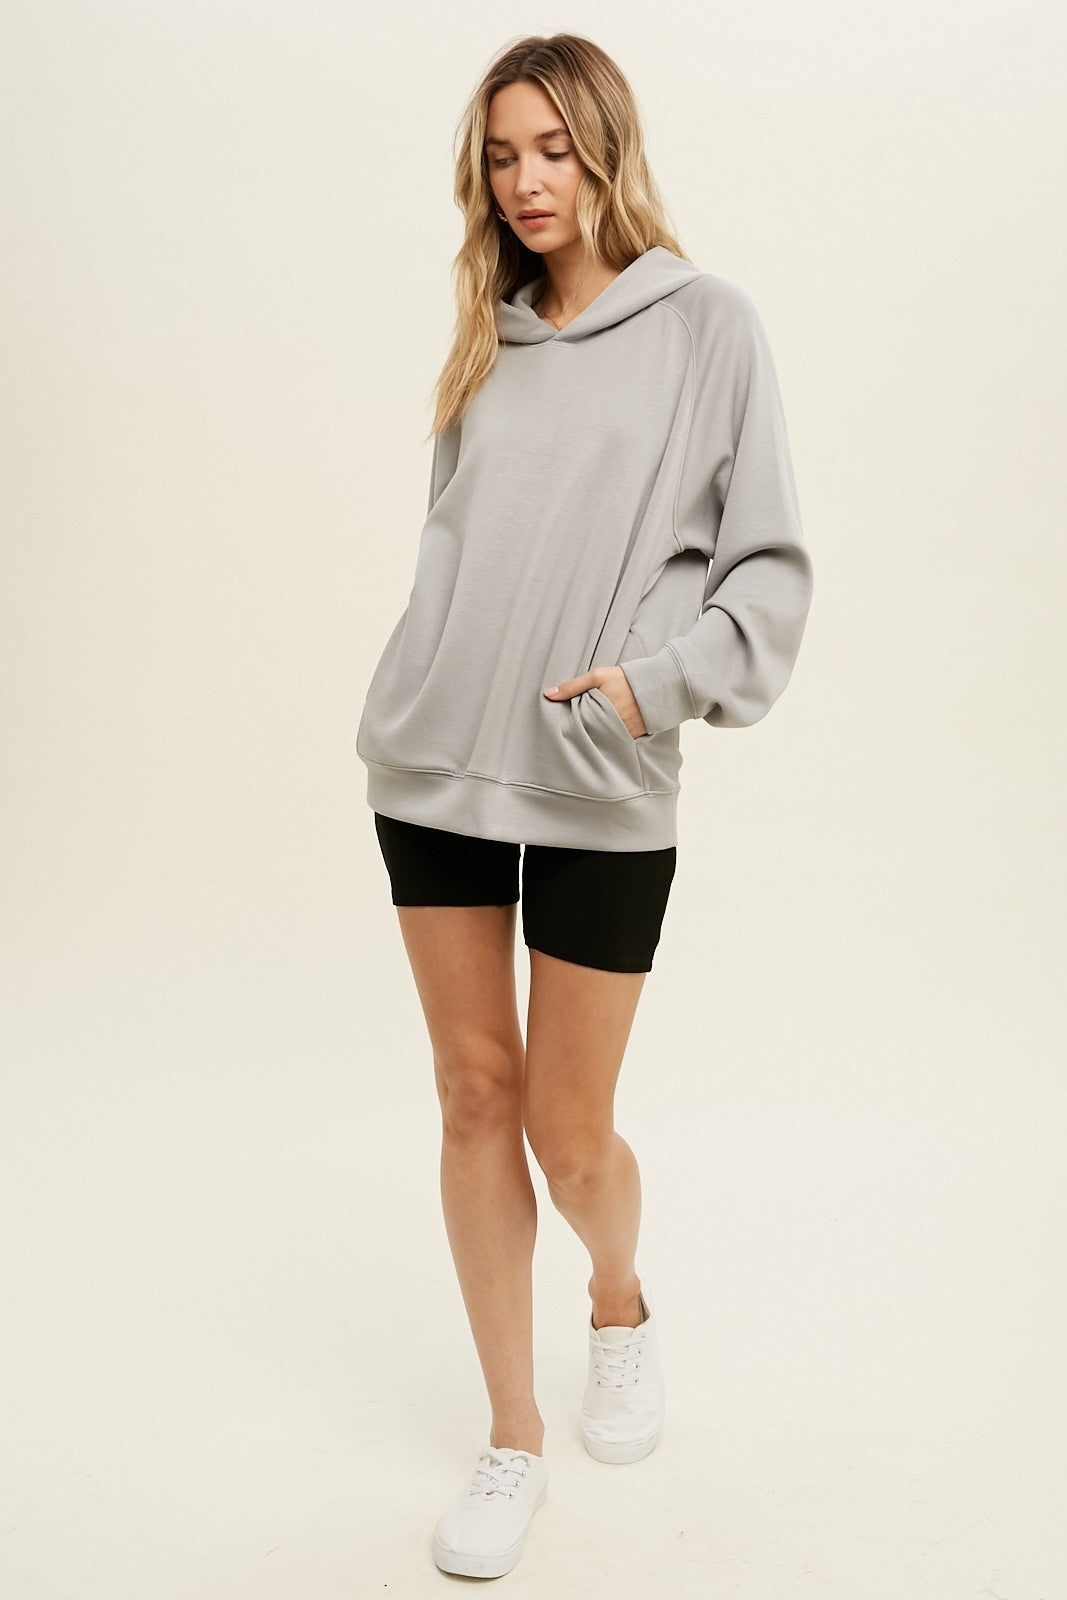 Wishlist® Soft touch Casual Knit Hoodie- Stone